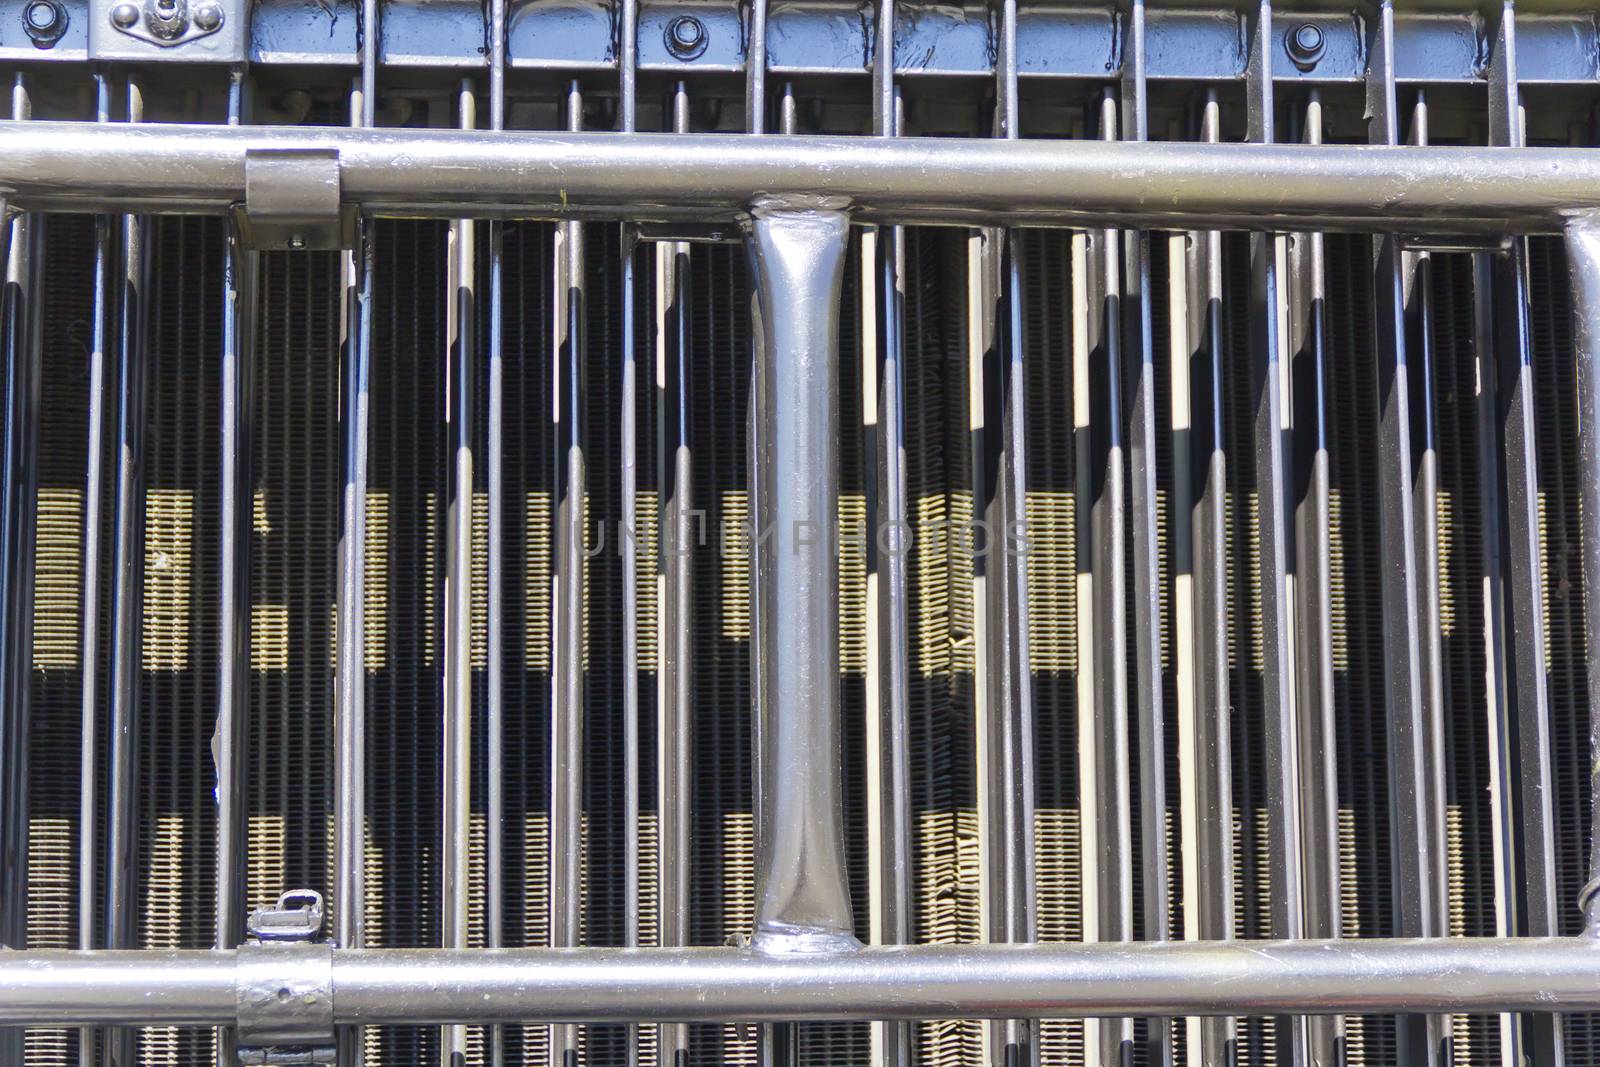 Radiator grille of military machine at the exhibition under open sky